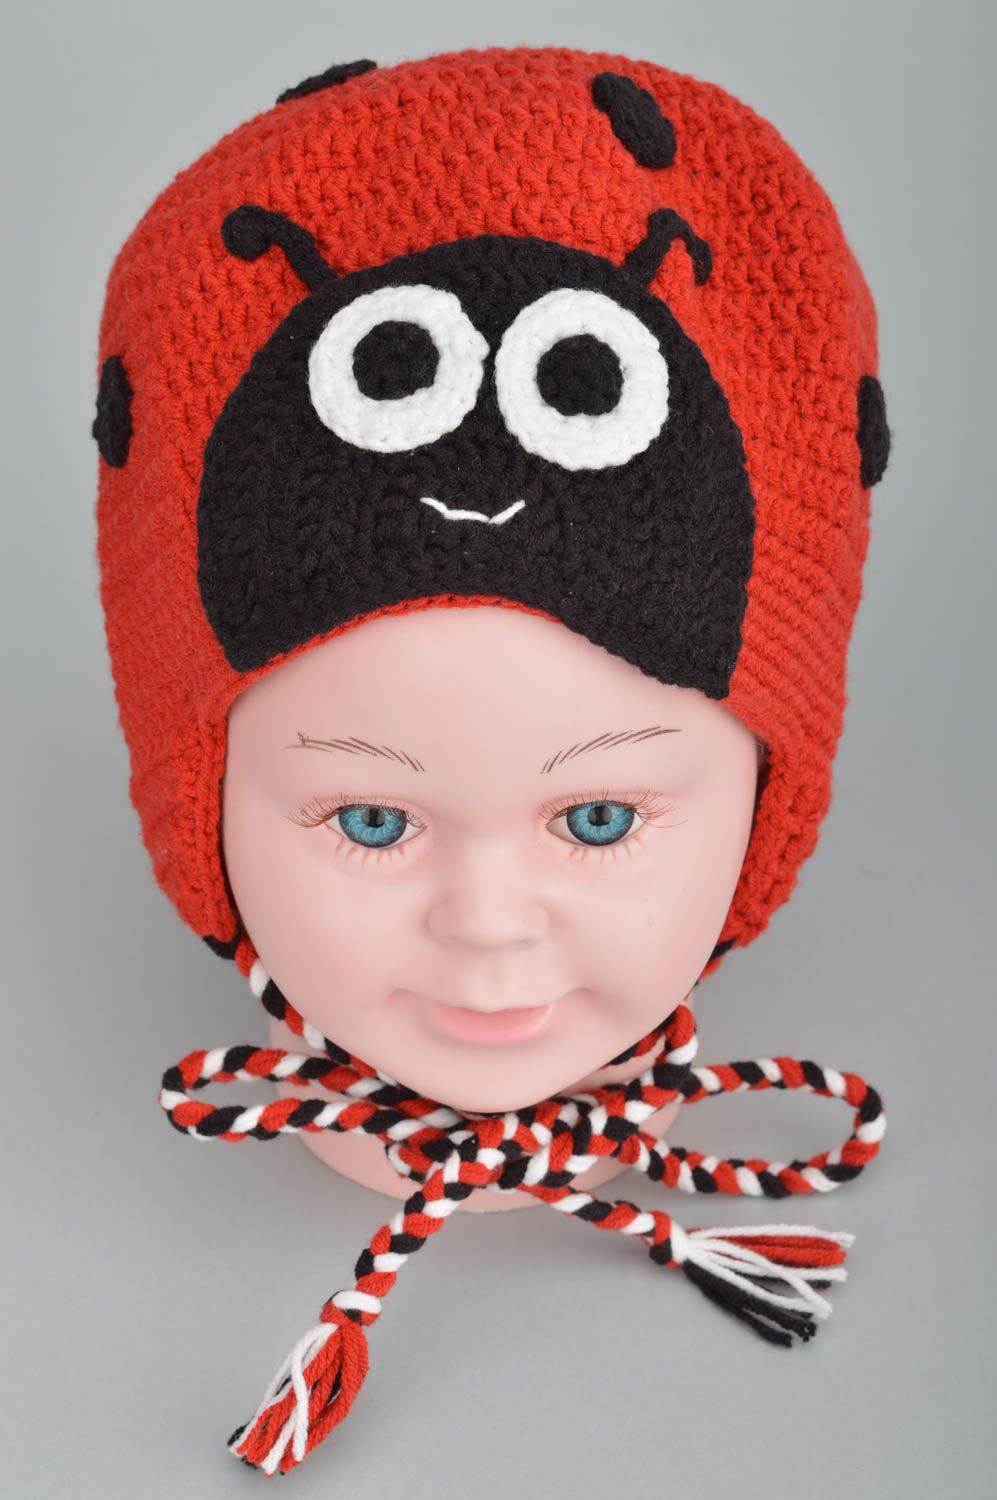 Handmade accessory crocheted hat ladybug cap red and black colors gift for girl photo 2